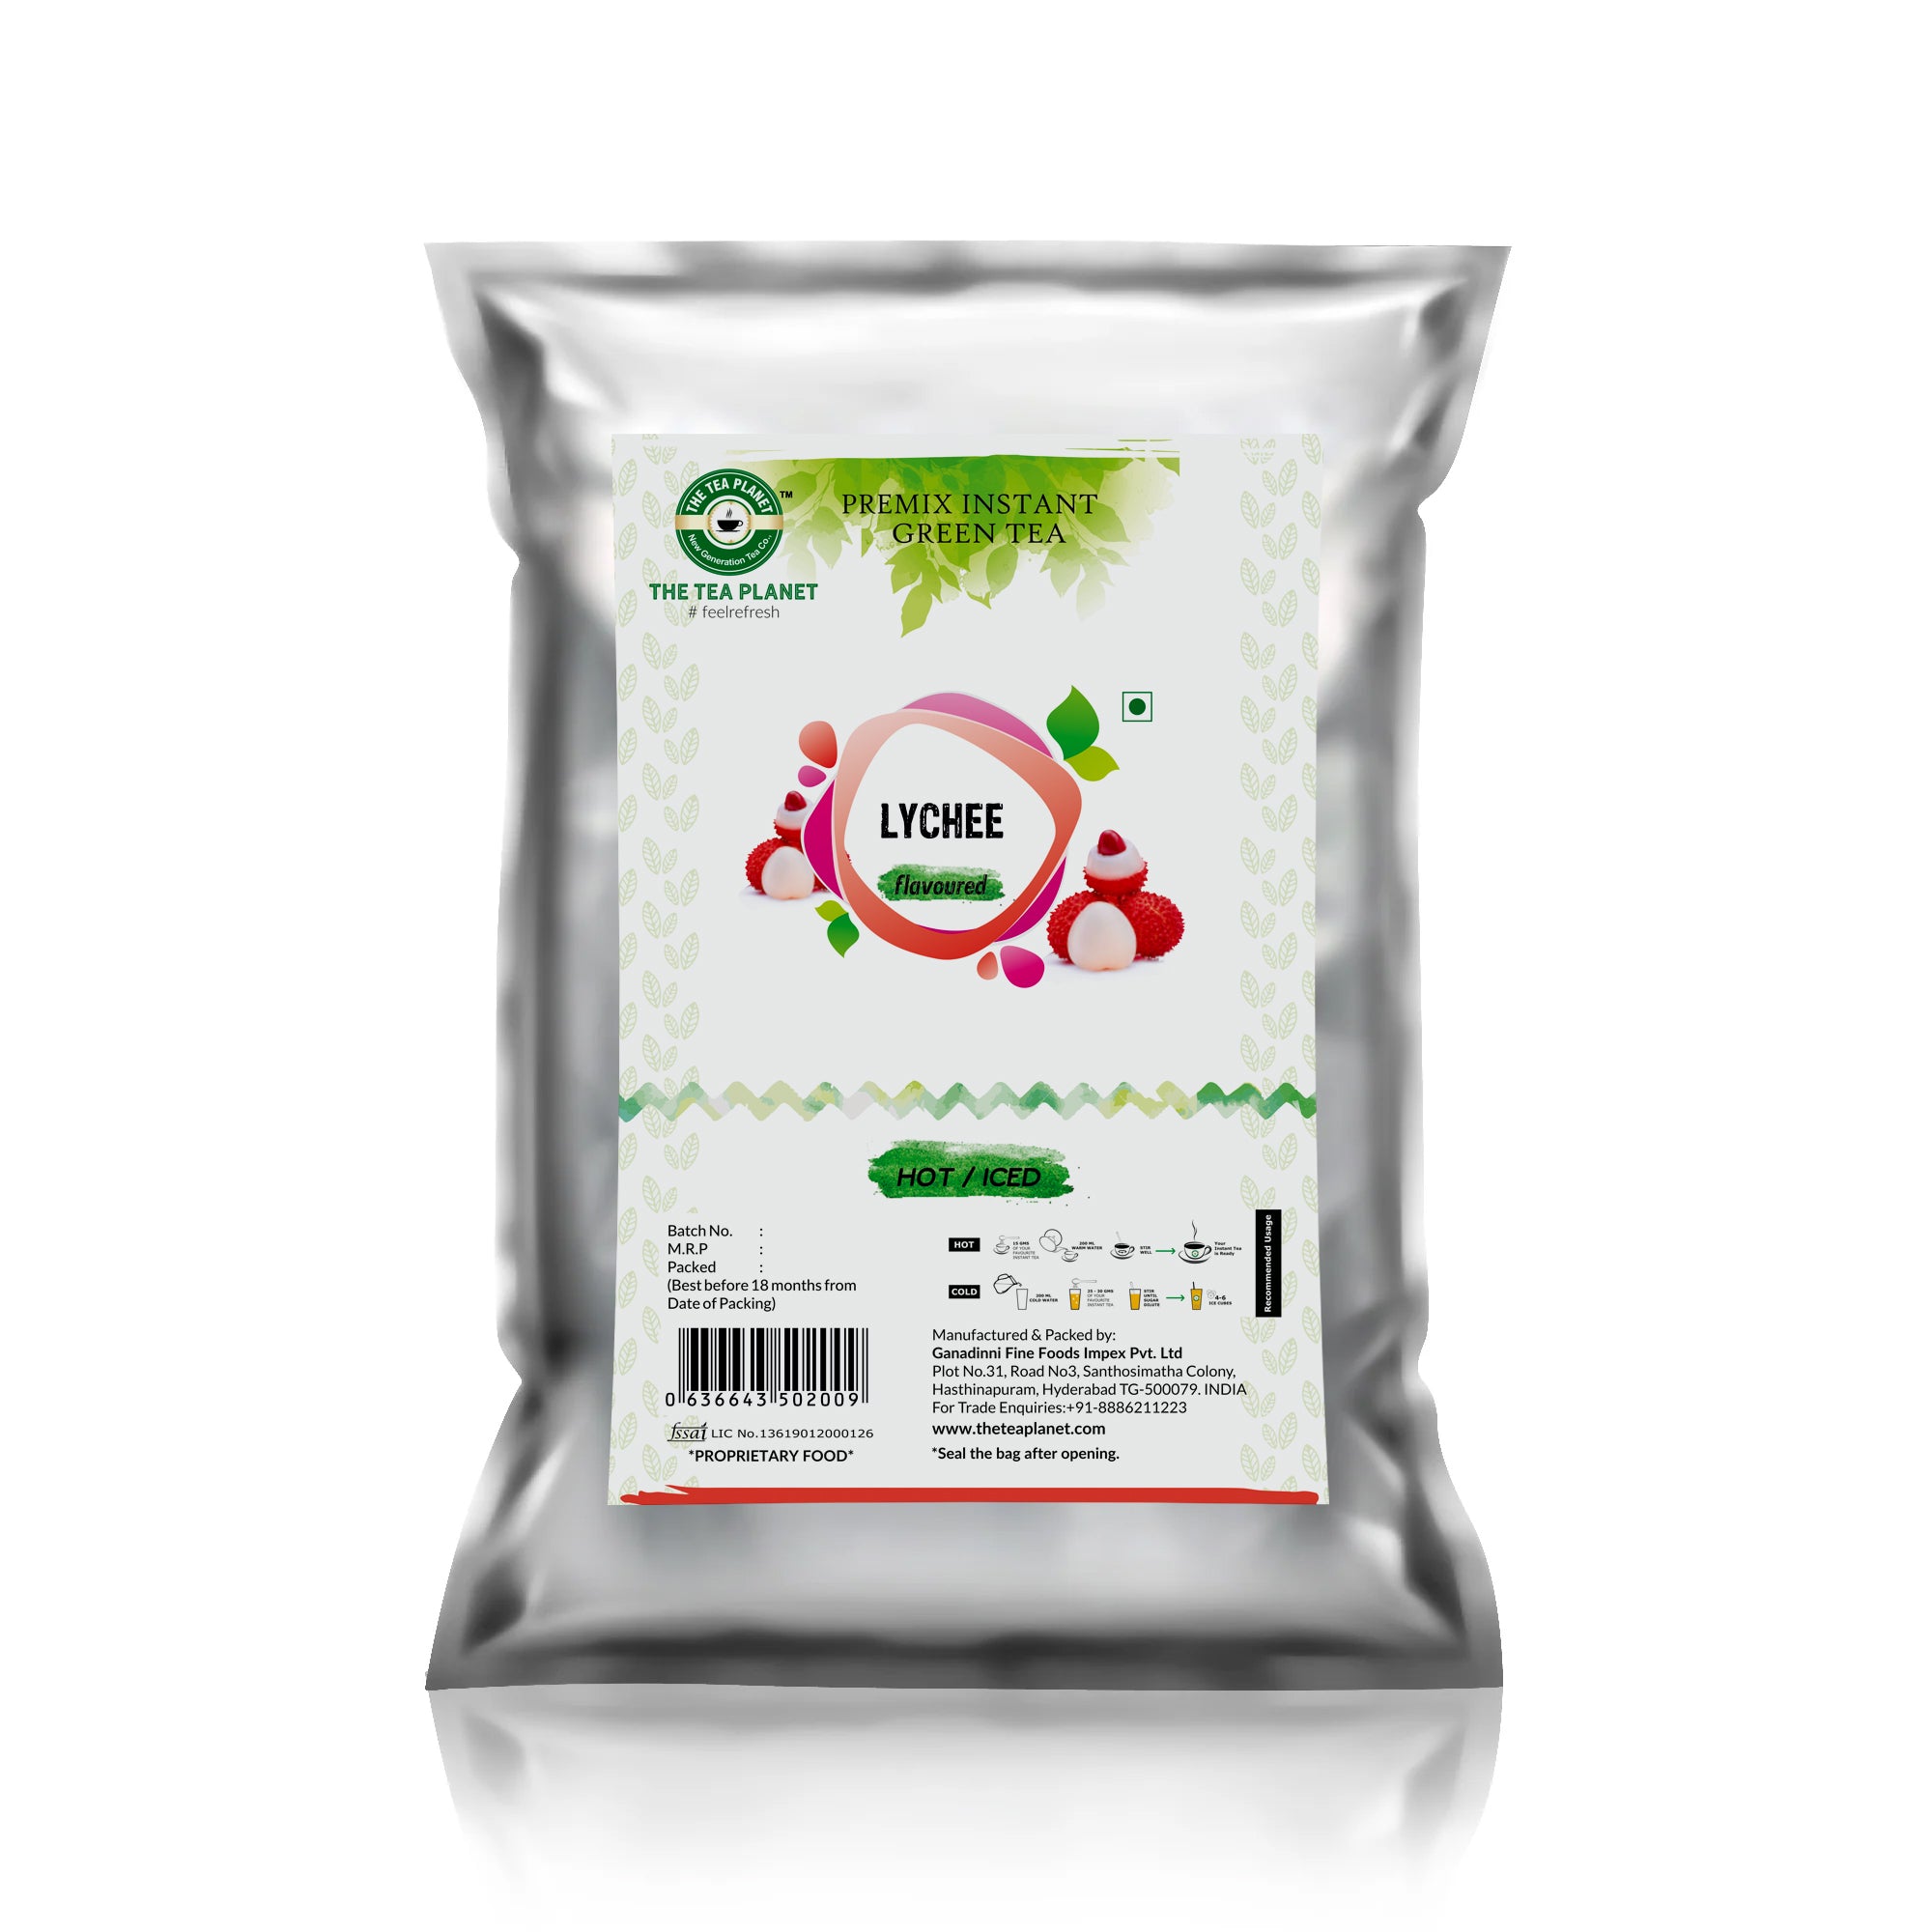 Lychee Flavored Instant Green Tea - 1kg